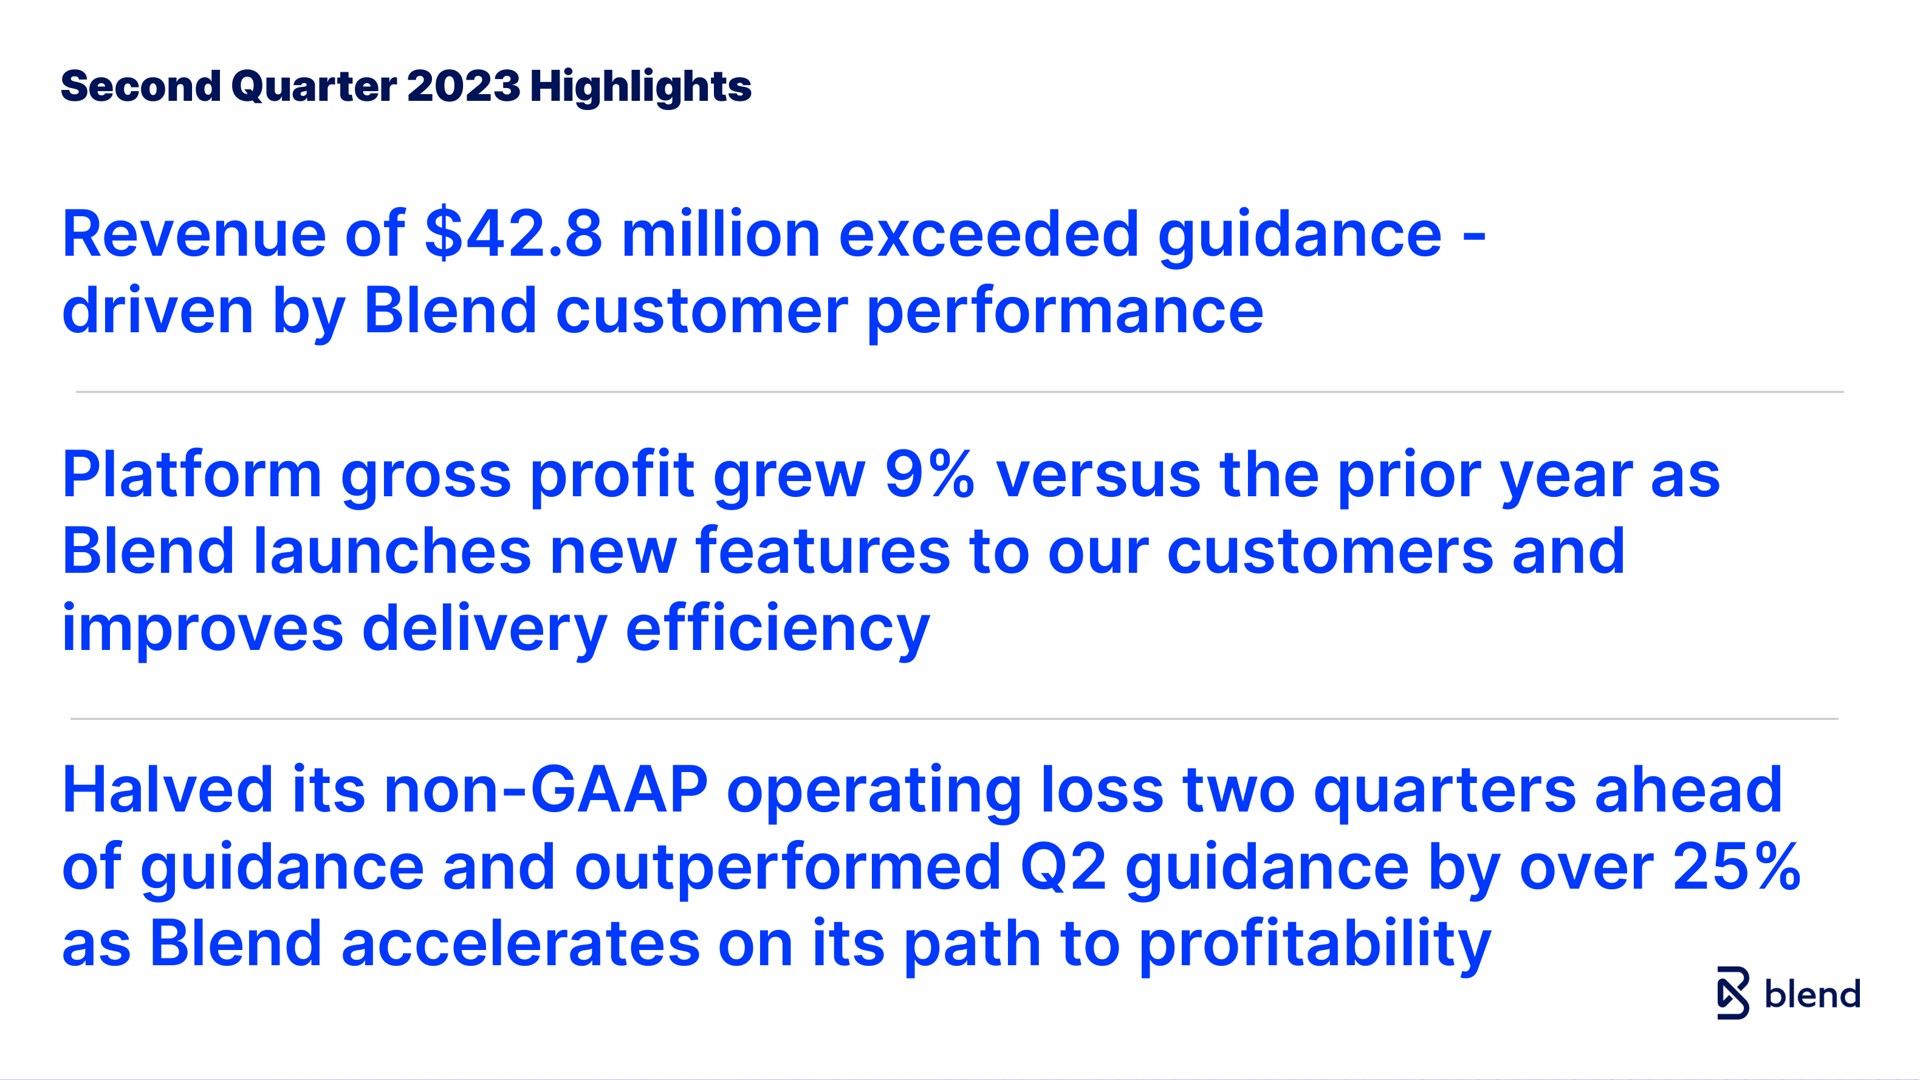 second quarter highlights revenue of million exceeded guidance driven by blend customer performance platform gross profit grew versus the prior year as blend launches new features to our customers and improves delivery efficiency halved its non operating loss two quarters ahead of guidance and outperformed guidance by over as blend accelerates on its path to profitability lend | Blend